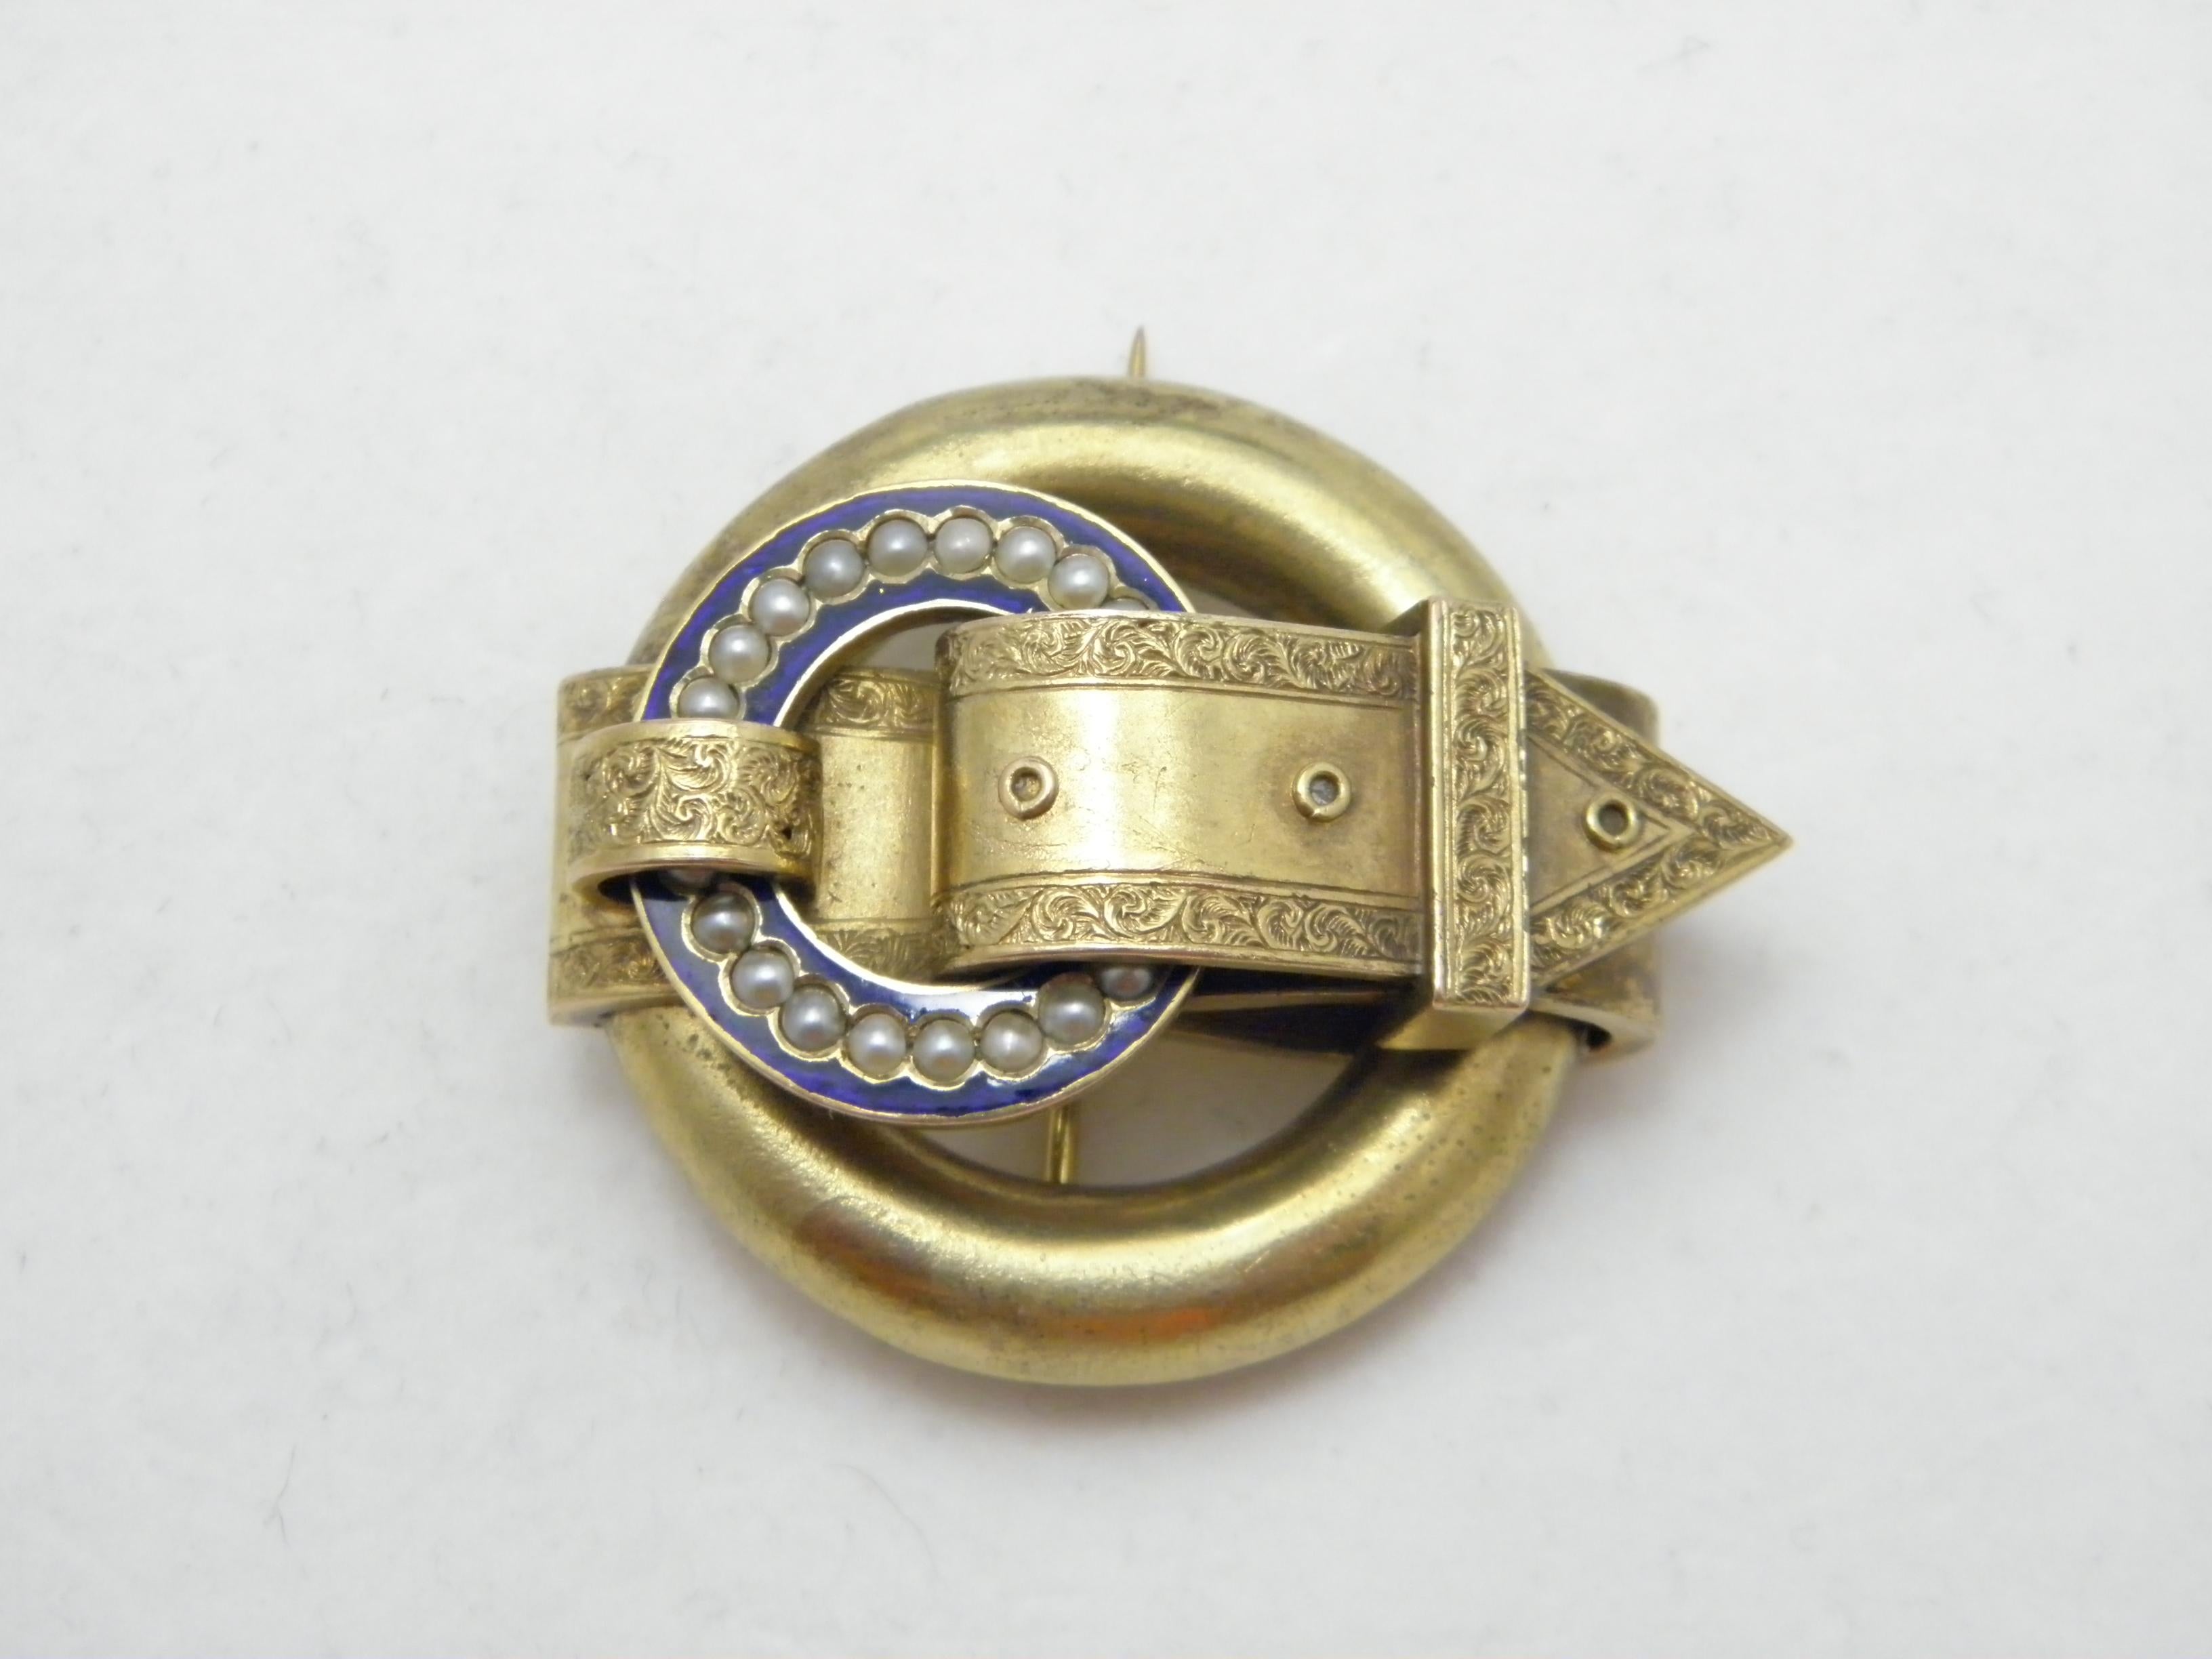 If you have landed on this page then you have an eye for beauty.

On offer is this gorgeous

18CT SOLID GOLD PEARL AND ENAMEL FRENCH BUCKLE BROOCH

DETAILS
Material: 18ct (750/000) Solid Heavy Yellow Gold
Style: Art Nouveau style seed pearl set